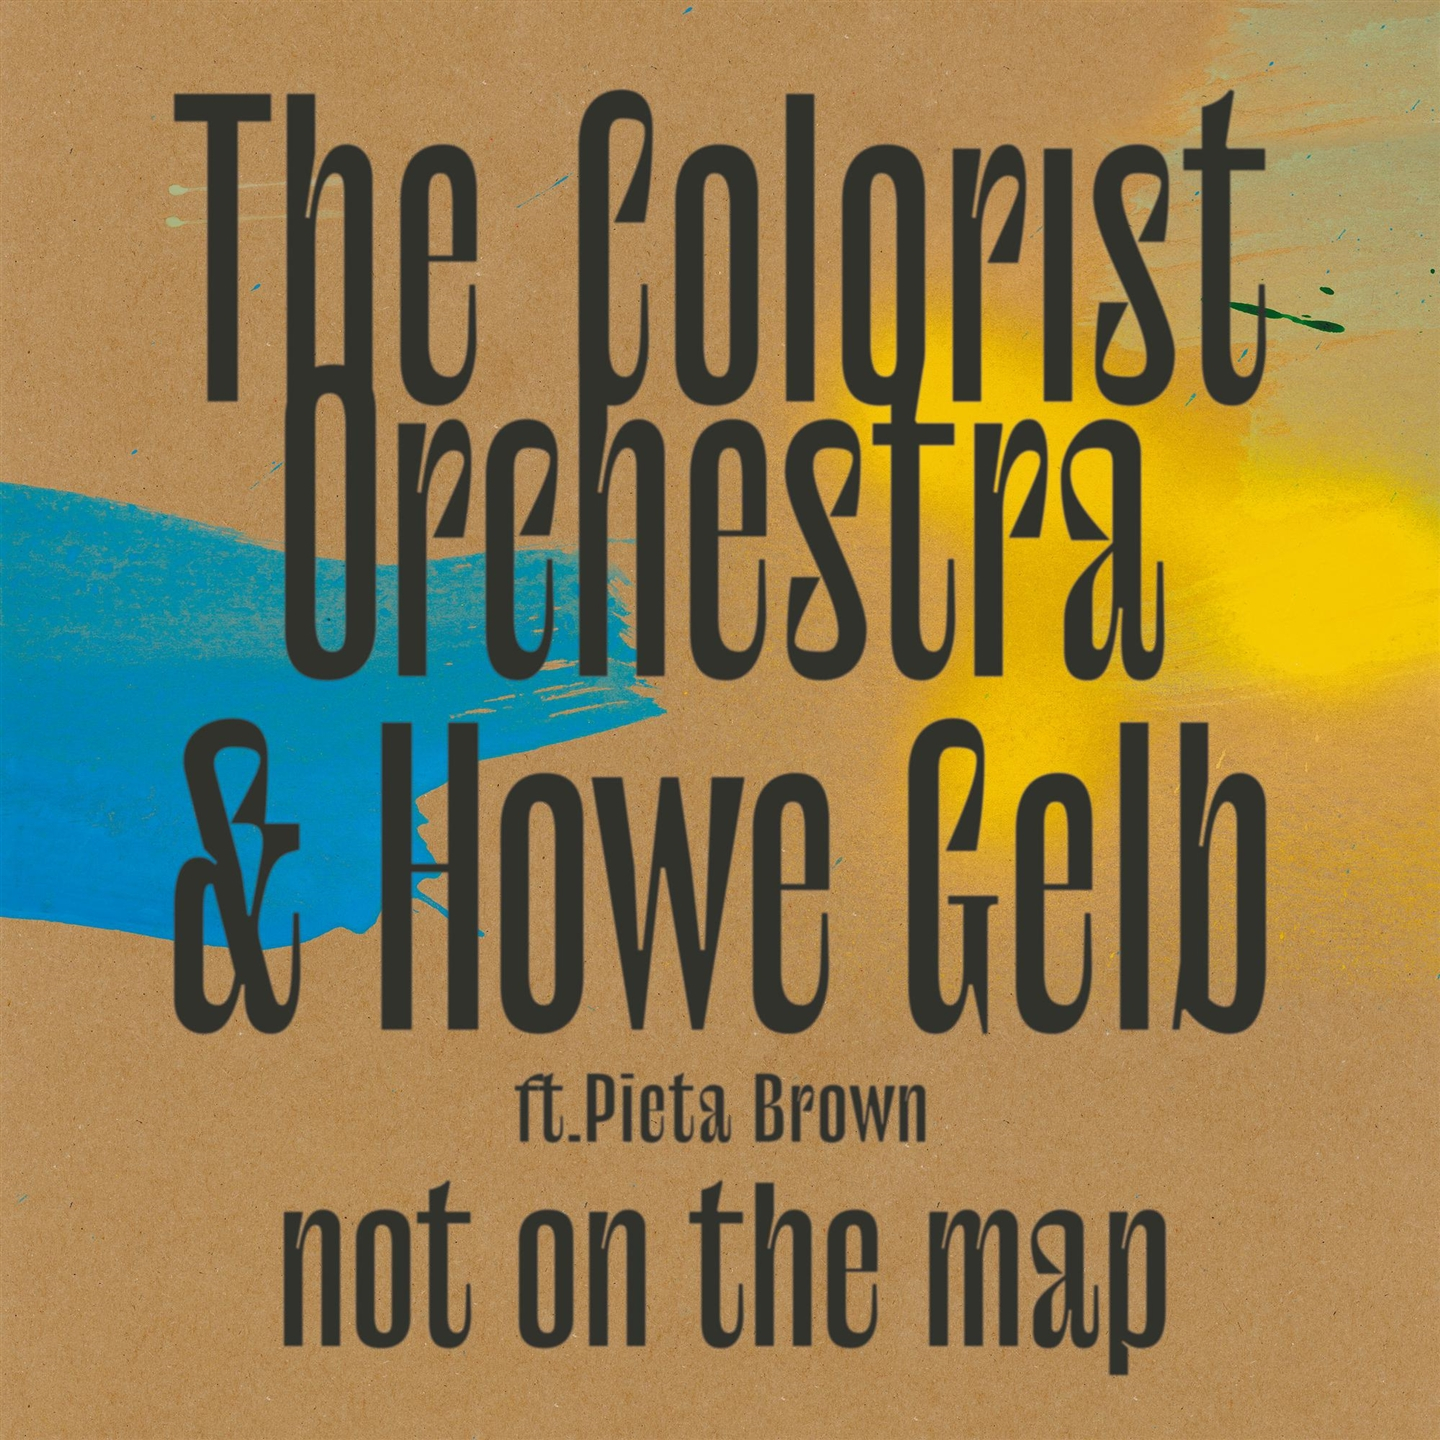 The Colorist Orchestra - Not On The Map [Lp] - Photo 1/1